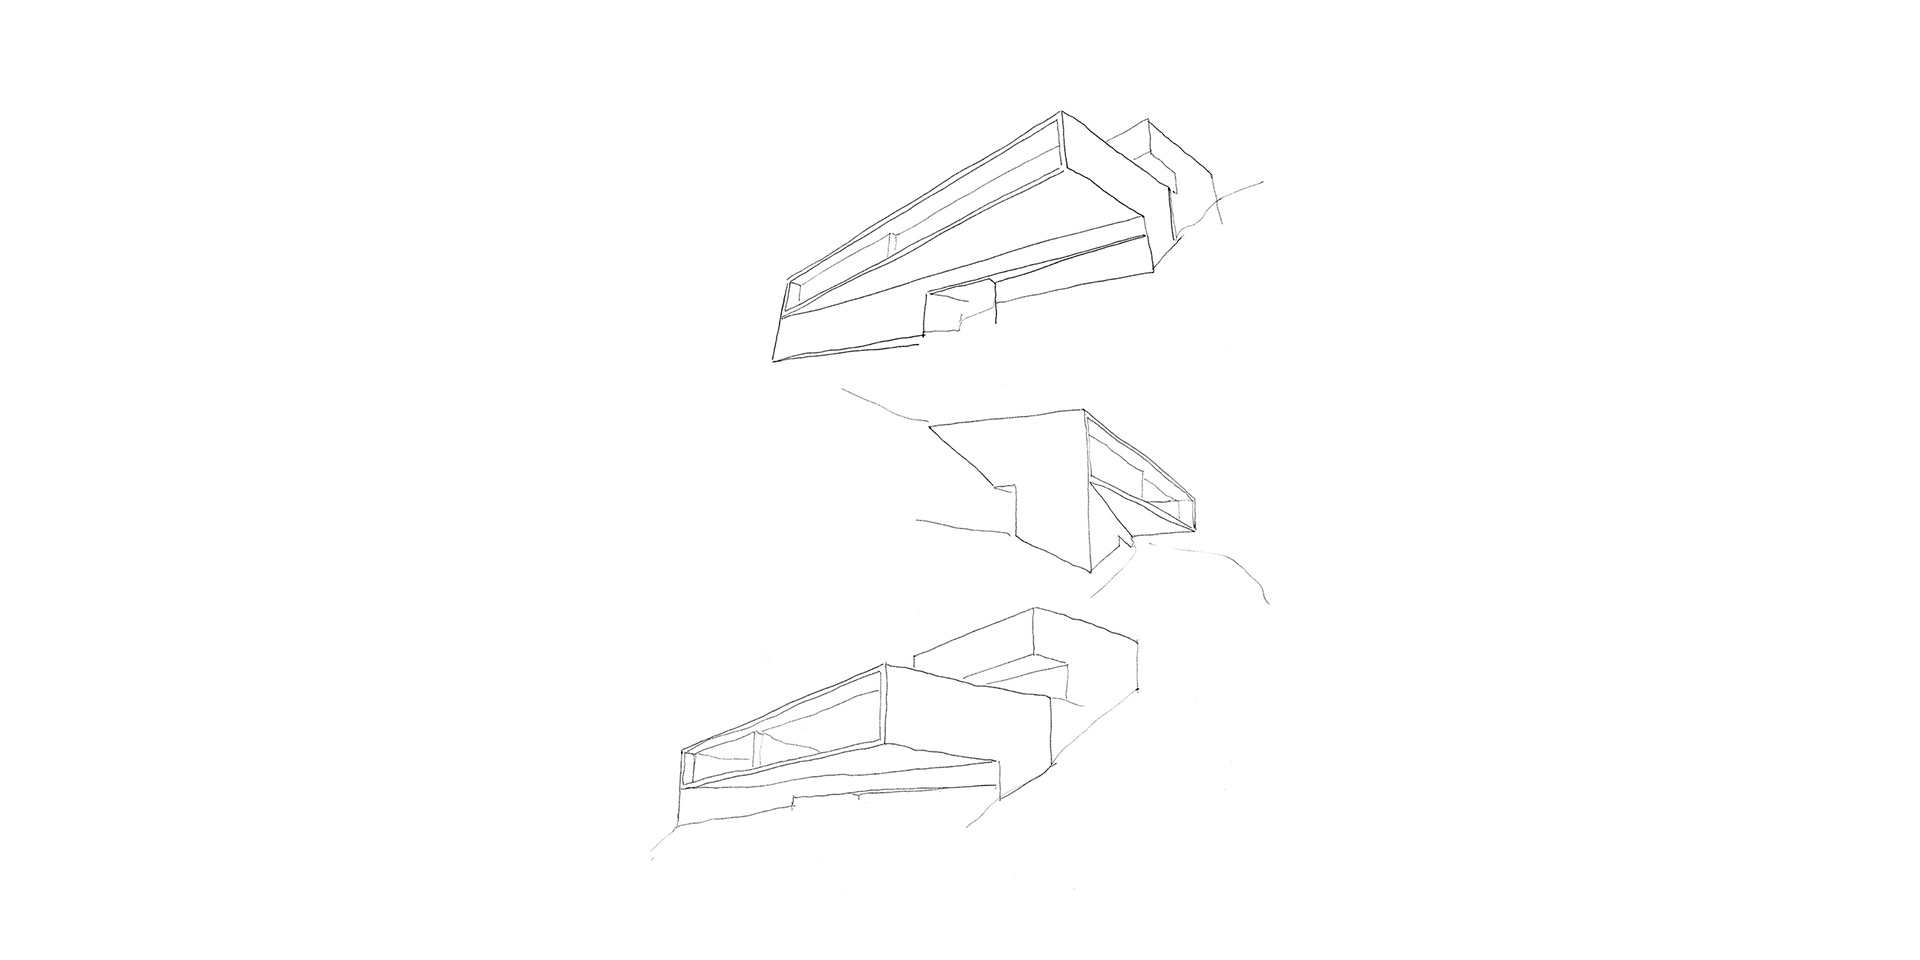 FRAN-SILVESTRE-ARQUITECTOS_HOUSE-IN-HOLLYWOOD-HILLS_SKETCH_001-1